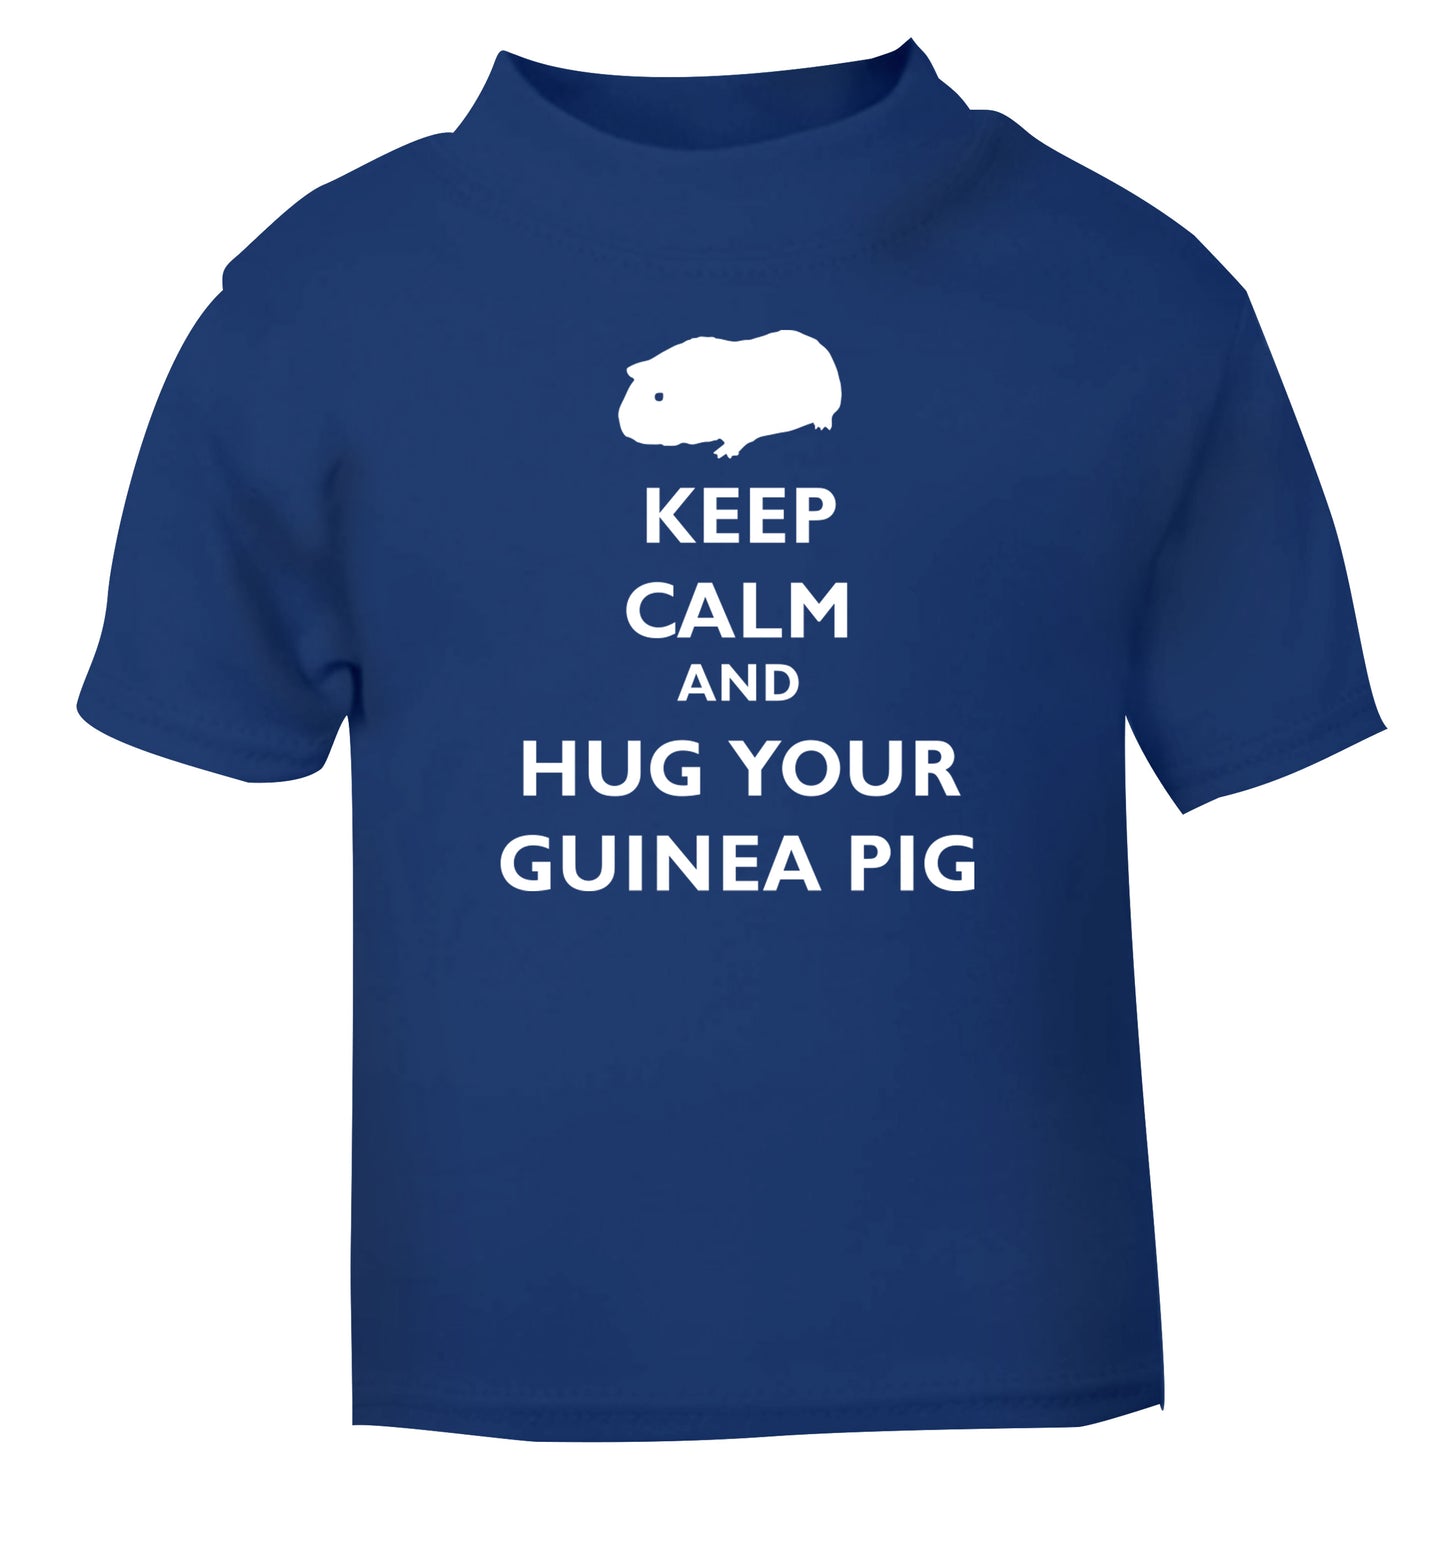 Keep calm and hug your guineapig blue Baby Toddler Tshirt 2 Years